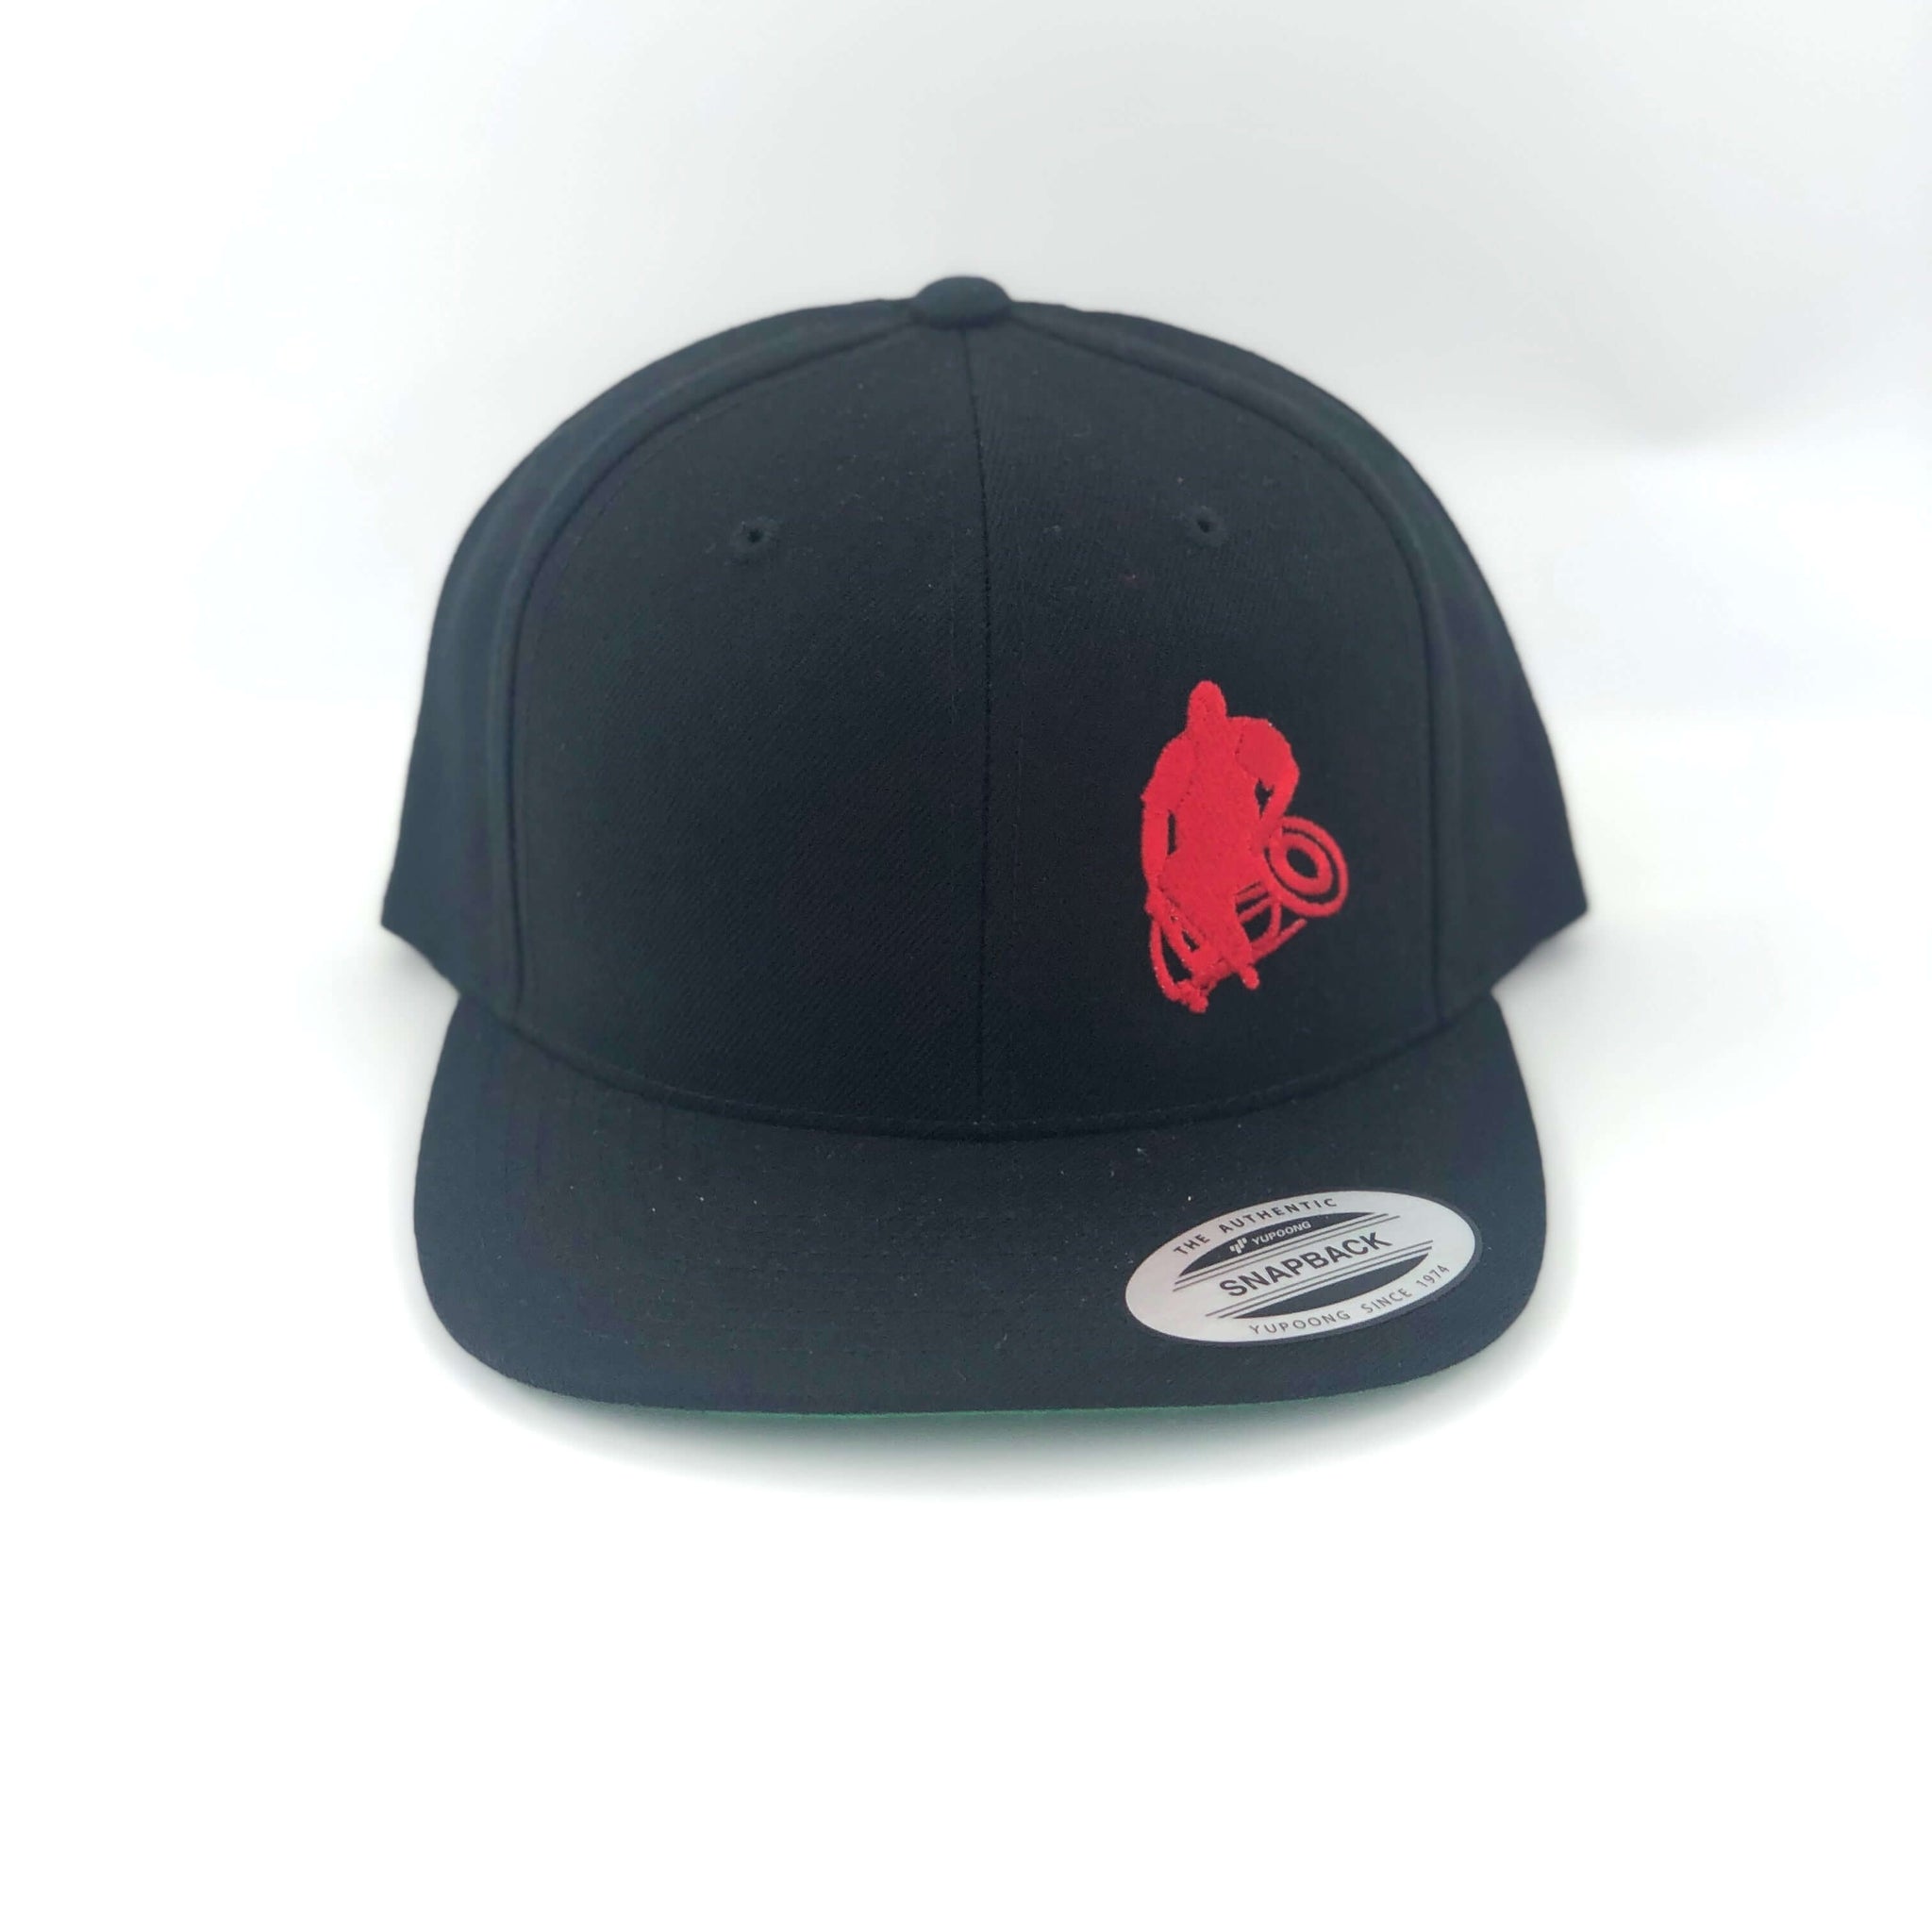 Black Flat-brim hat with red Wheelwod Logo on right front panel